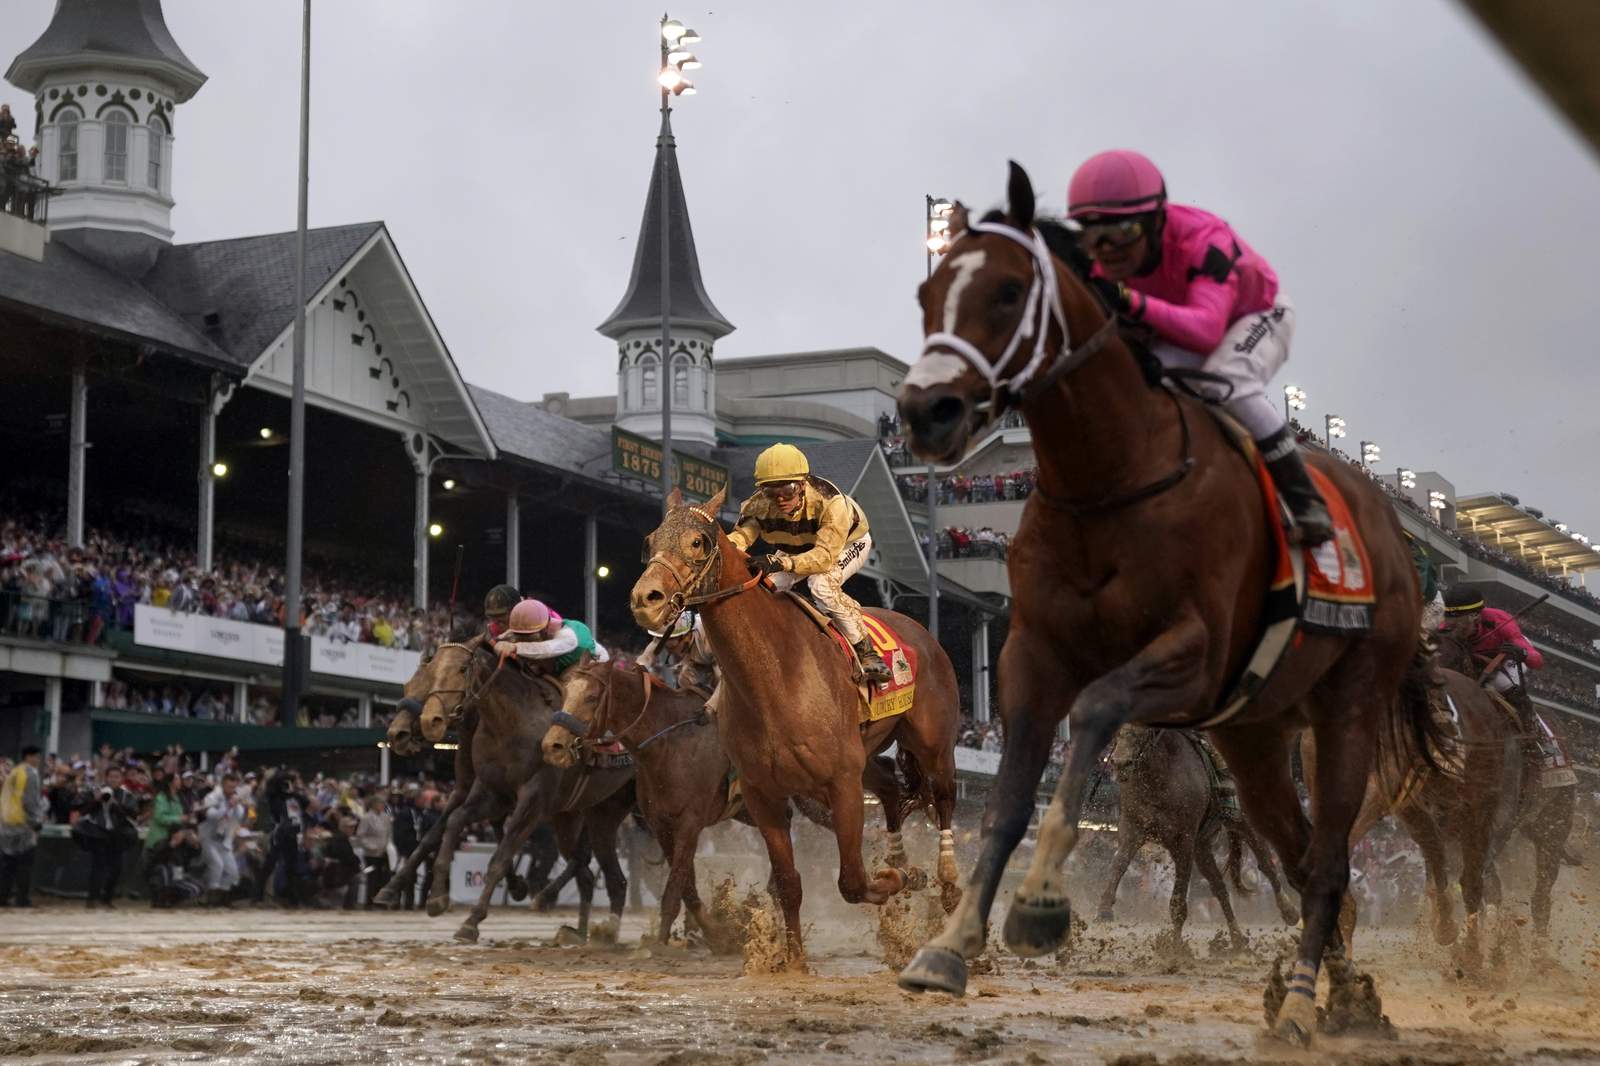 From Derby DQ to doping, a chaotic year in horse racing